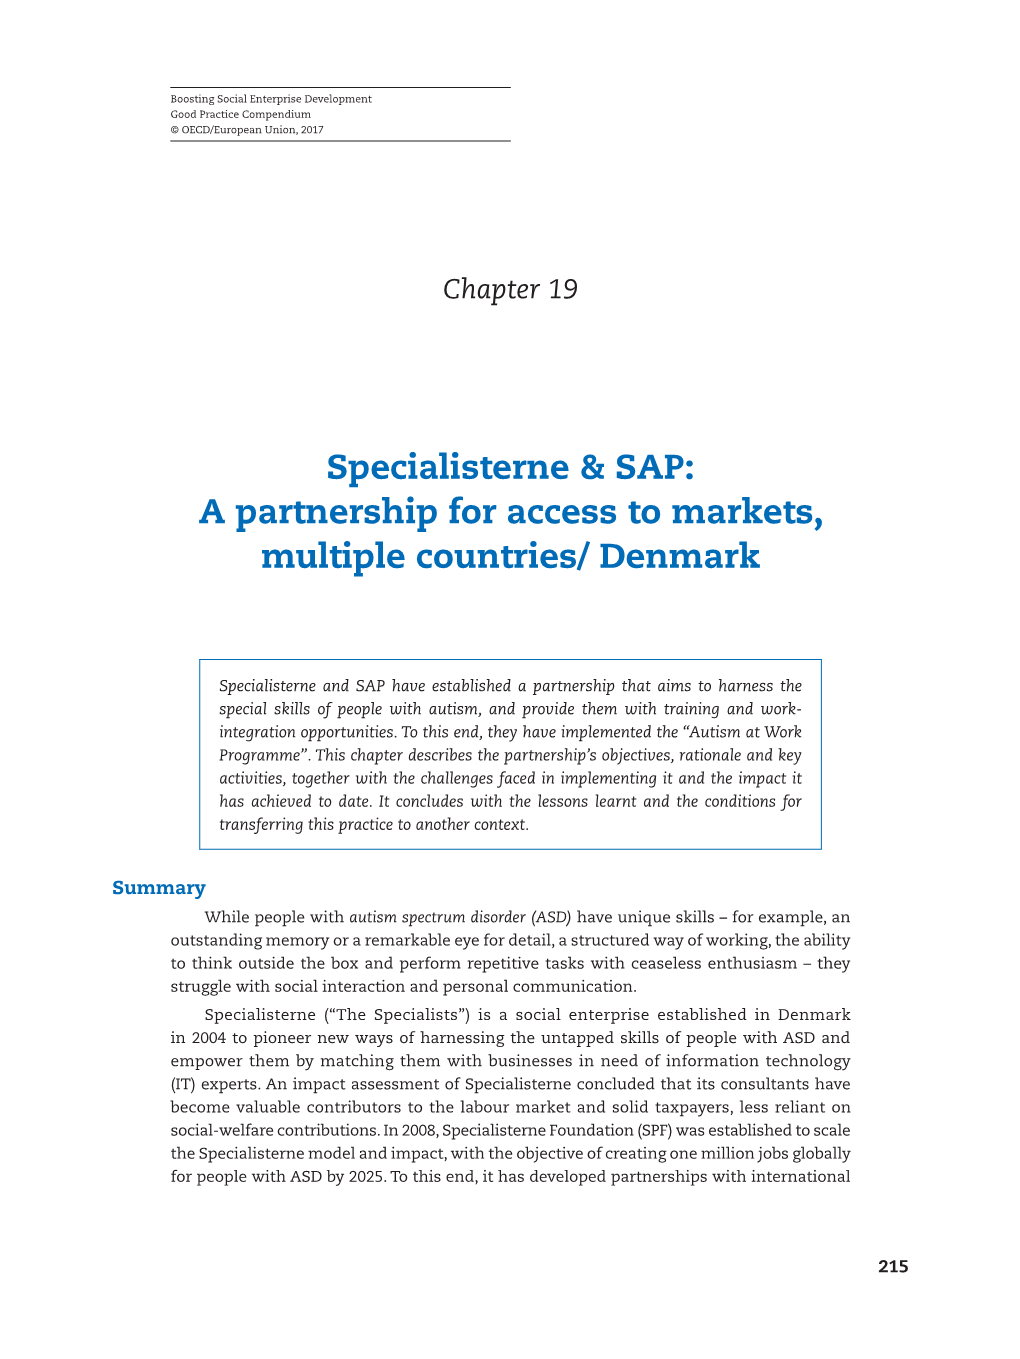 Specialisterne & SAP: a Partnership for Access to Markets, Multiple